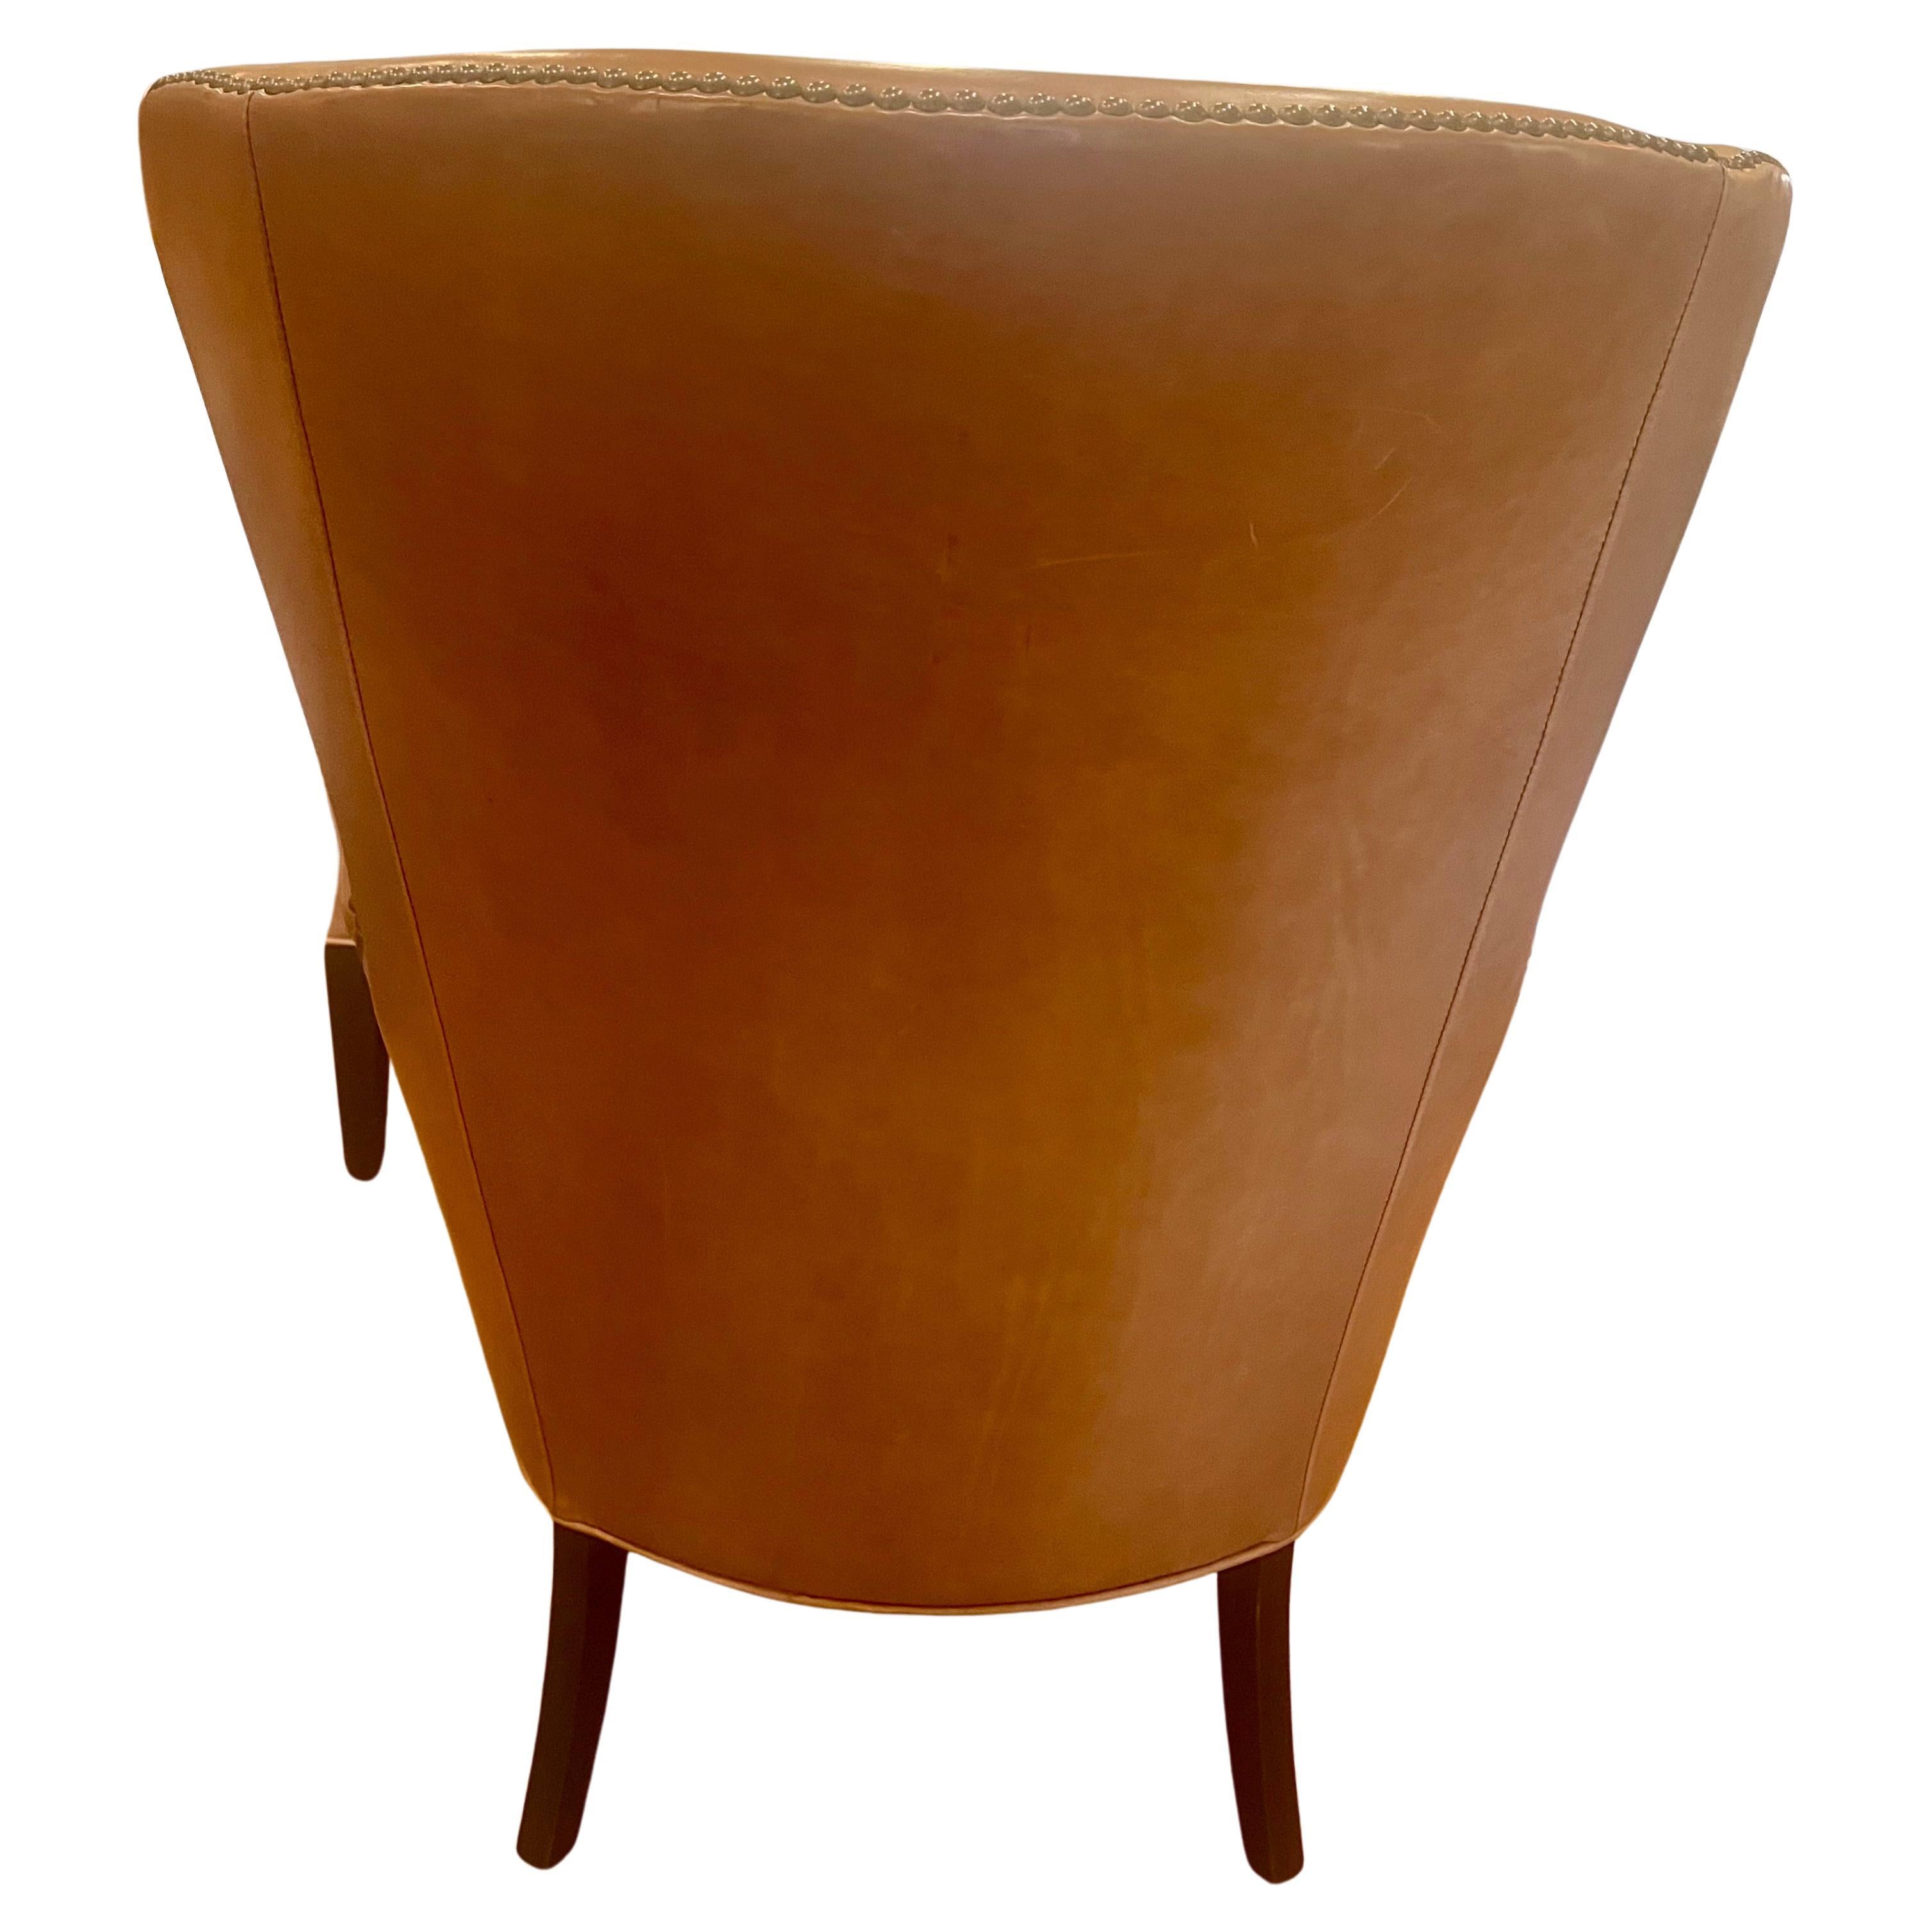 Great pair of caramel color leather wingback chairs by Williams Sonoma, lightly used nice clean condition solid, and sturdy. elegant contemporary and unique style that blends well with mid-century, Danish modern Classic home decor.